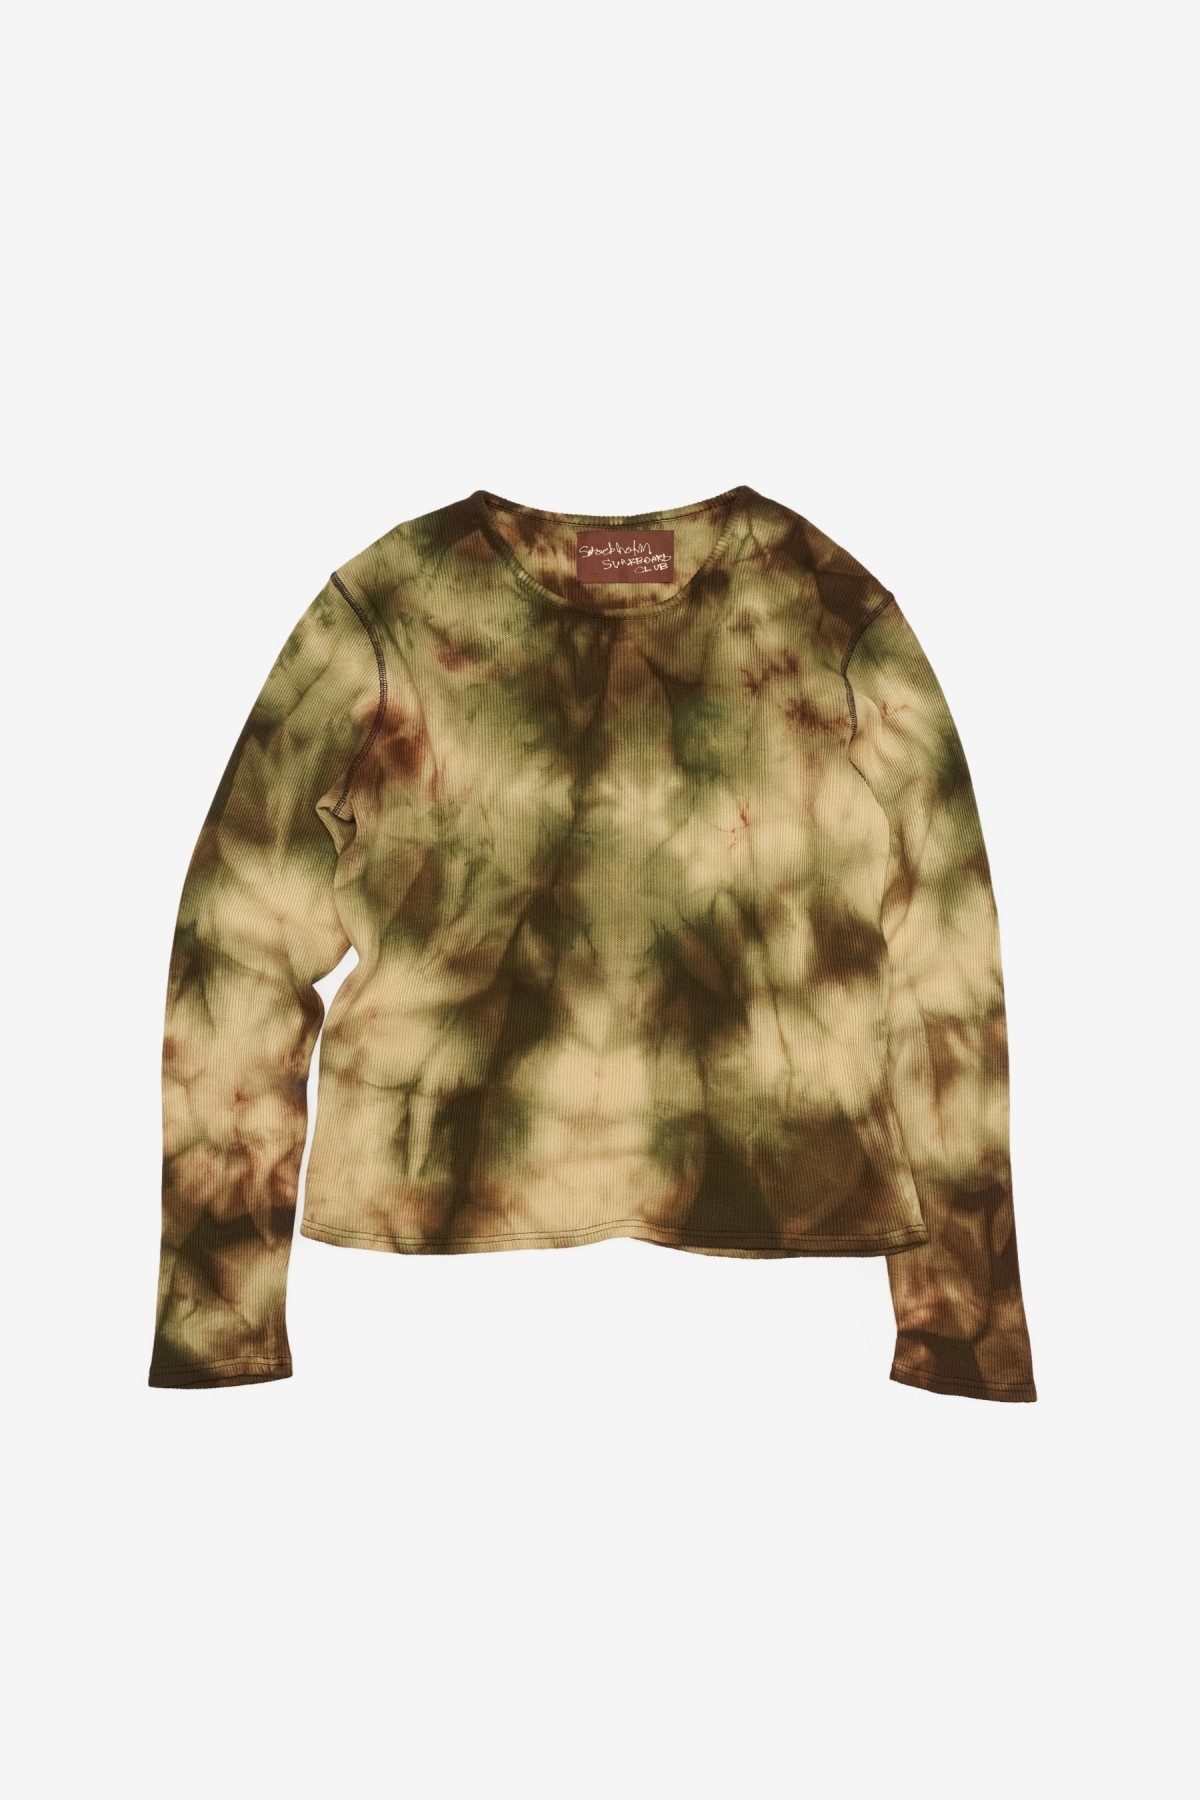 Stockholm Surfboard Club Waffle Longsleeve in Green and Brown